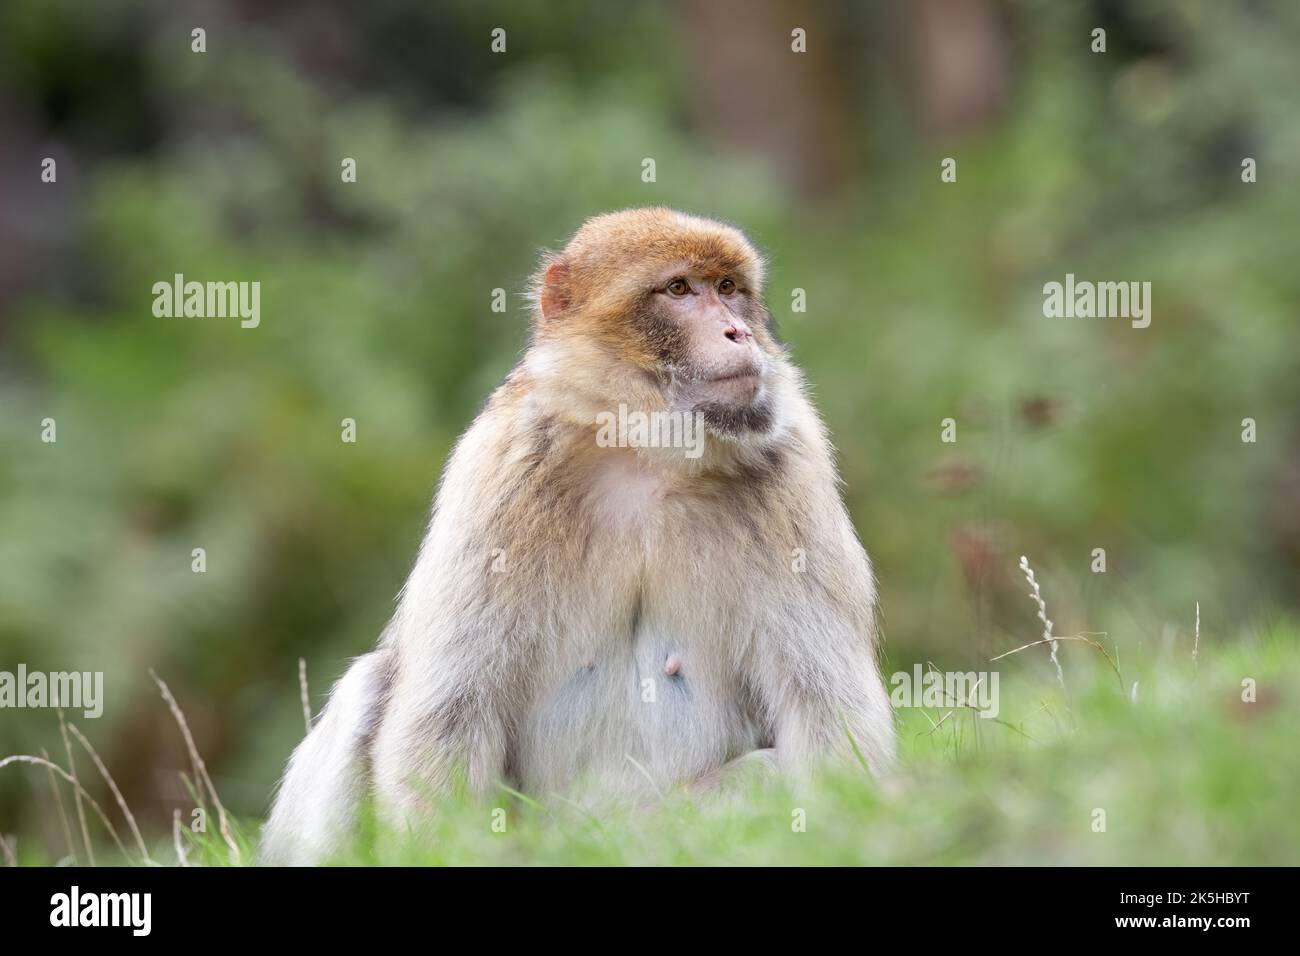 Mature female Barbary Macaque (Macaca sylvanus) at the edge of a forest Stock Photo